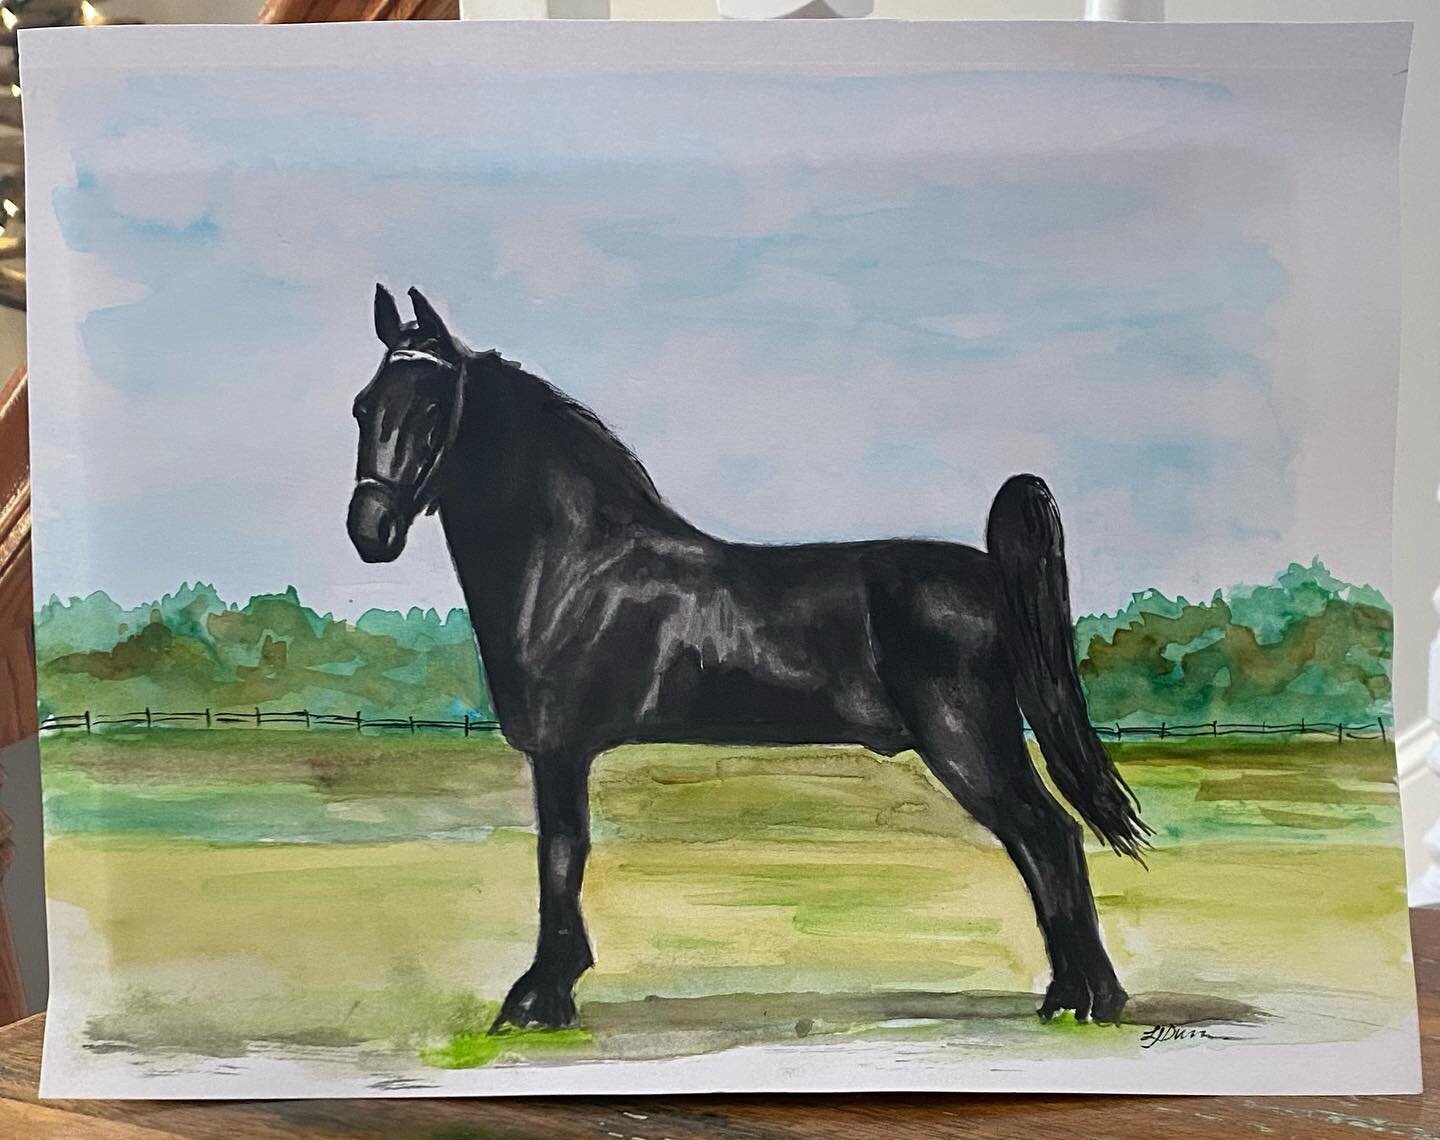 ~ Kentucky Derby Day ~
One has to admit that horses are magnificent animals. Kentucky has the Derby, but Tennessee has the National Walking Horse Celebration every August.  In honor of the Derby, congratulations Mage!!
&quot;Walker&quot; 9x12 waterco